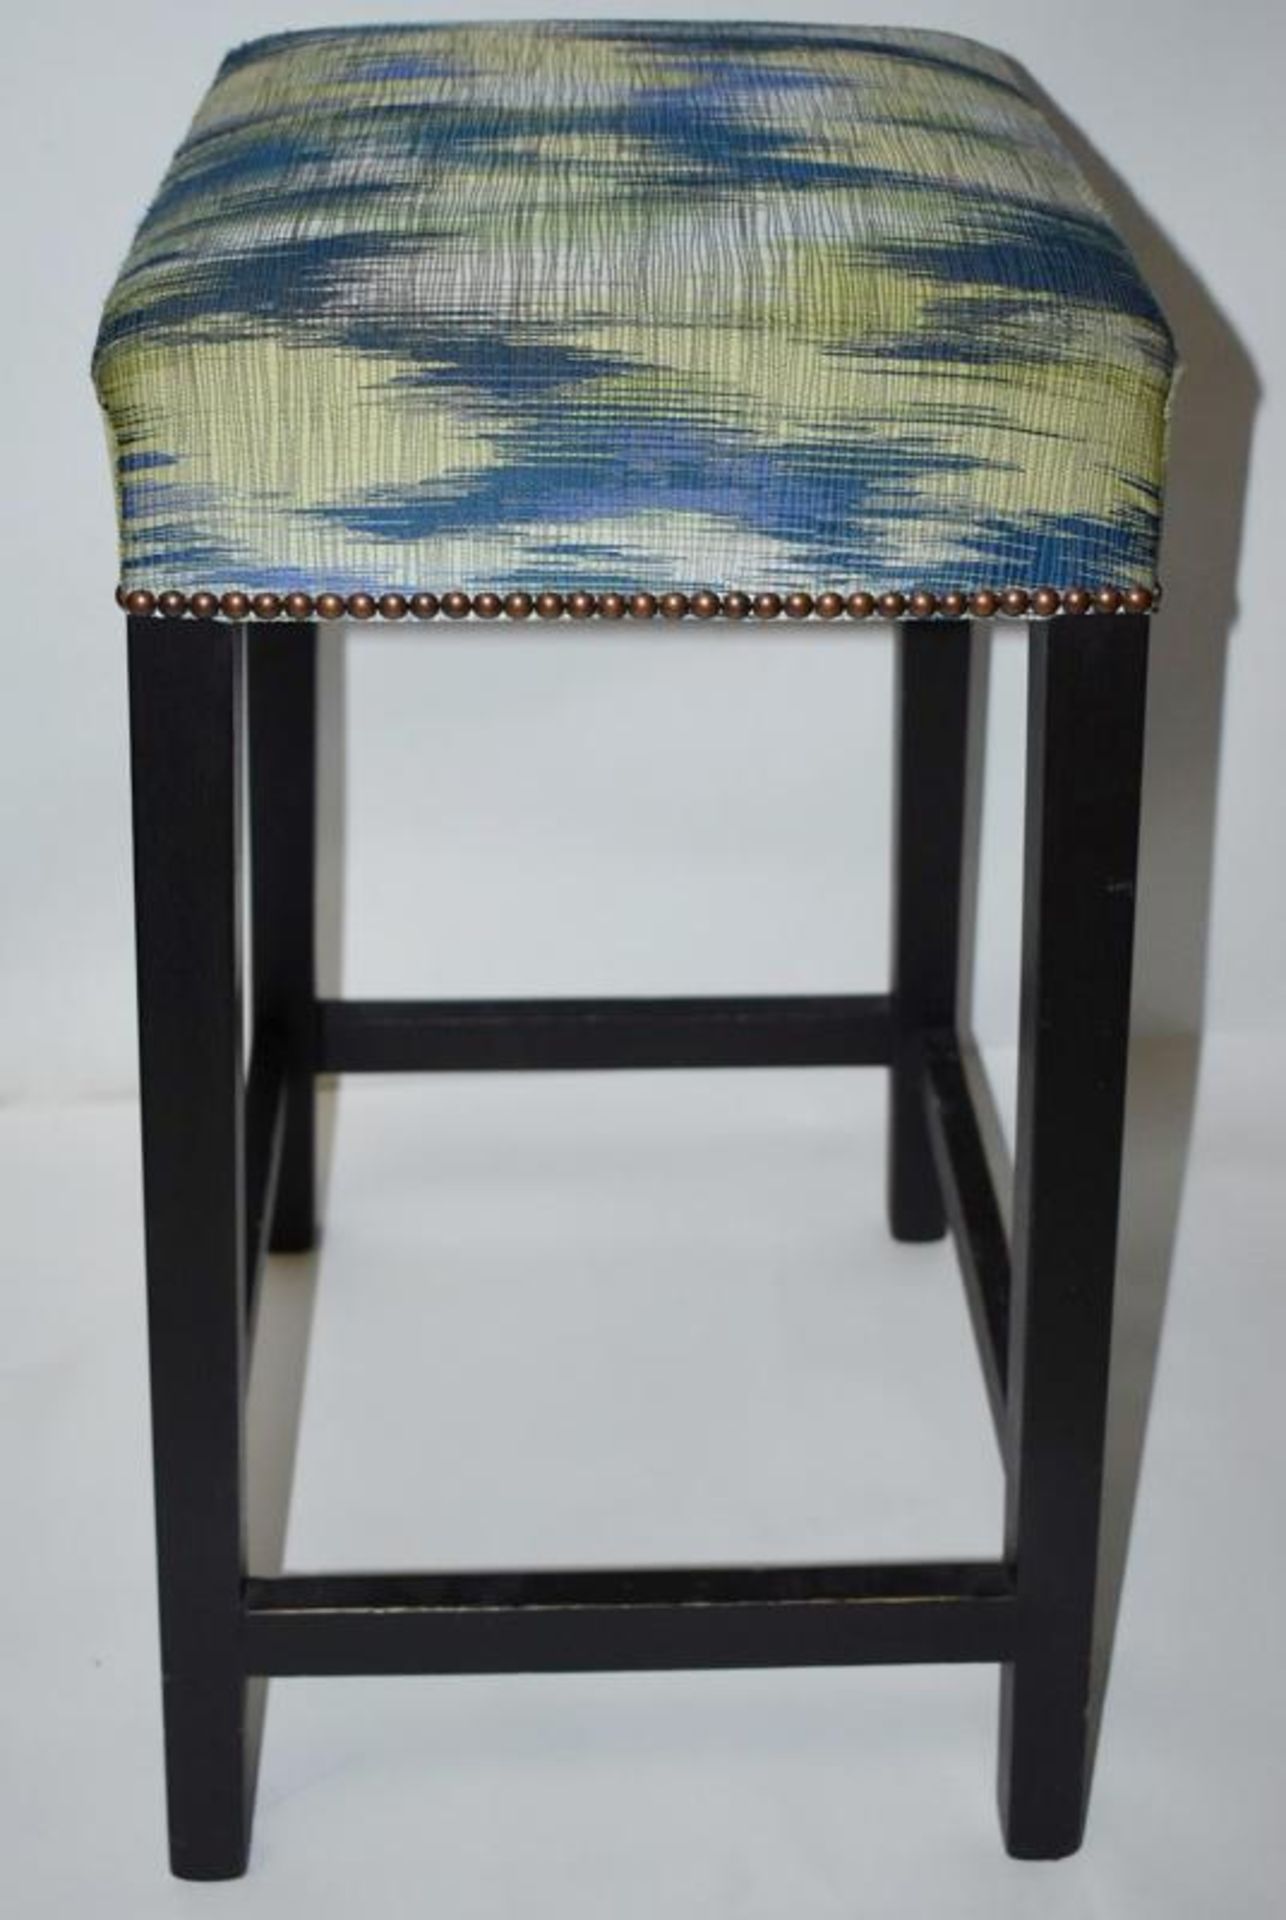 1 x Contemporary Bar Stool Upholstered In A Chic Designer Fabric - Recently Removed From A Famous De - Image 3 of 6